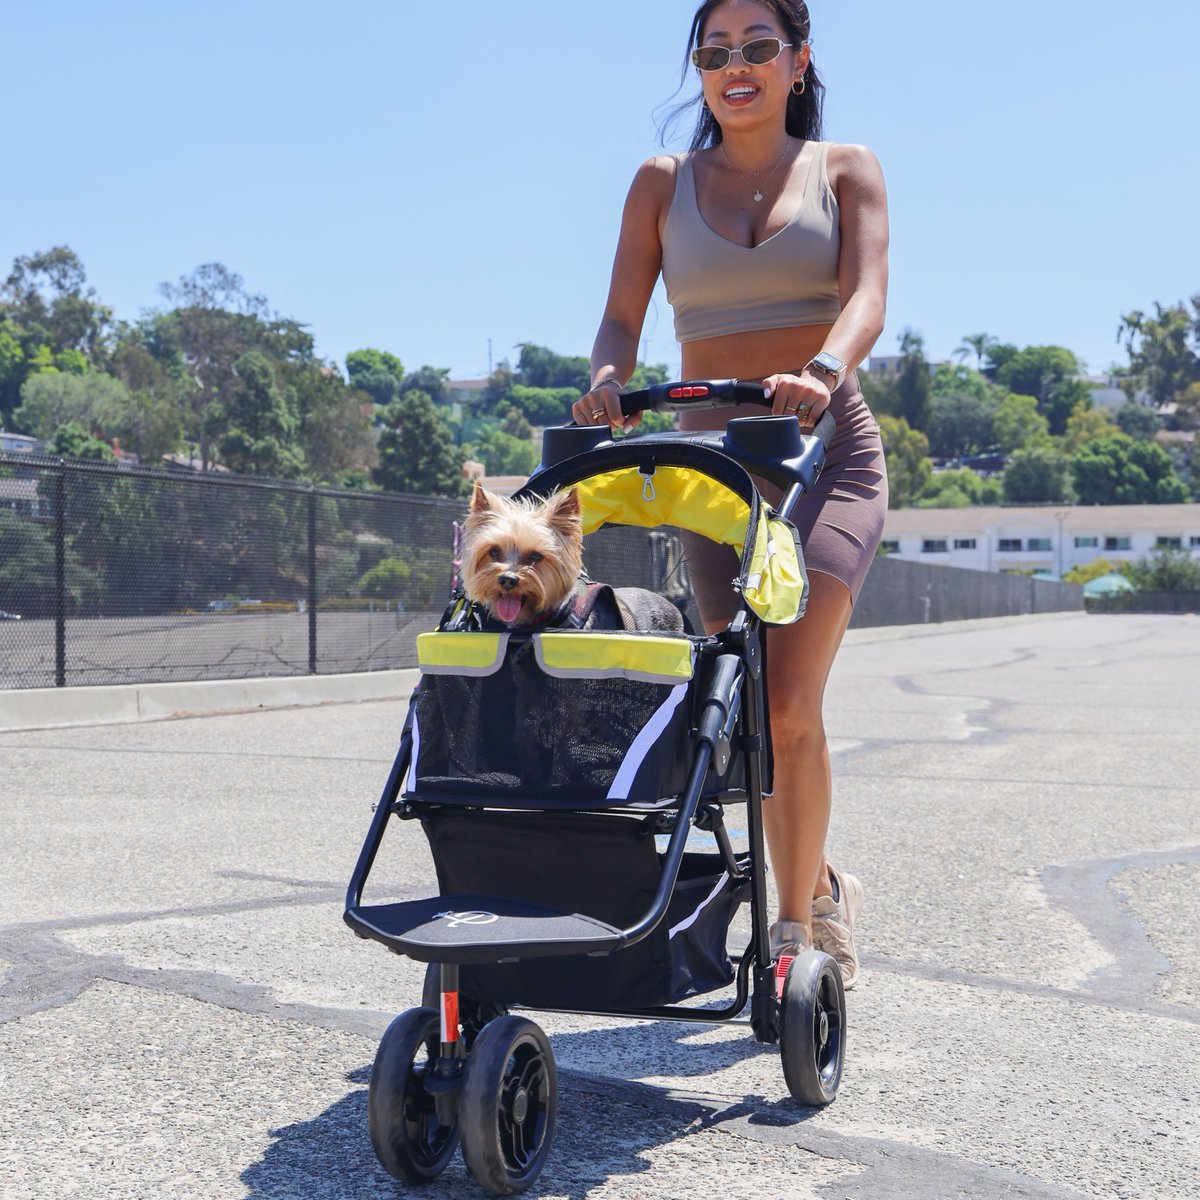 This Revolutionary Pet Stroller is changing the way pet parents travel with their fur babies! and now you can get 15% off for a short time during out Memorial Day Sales Event!!!
✅Durable and easy to push
✅Simple to fold and store
✅Tons of storage compartments

#petstroller